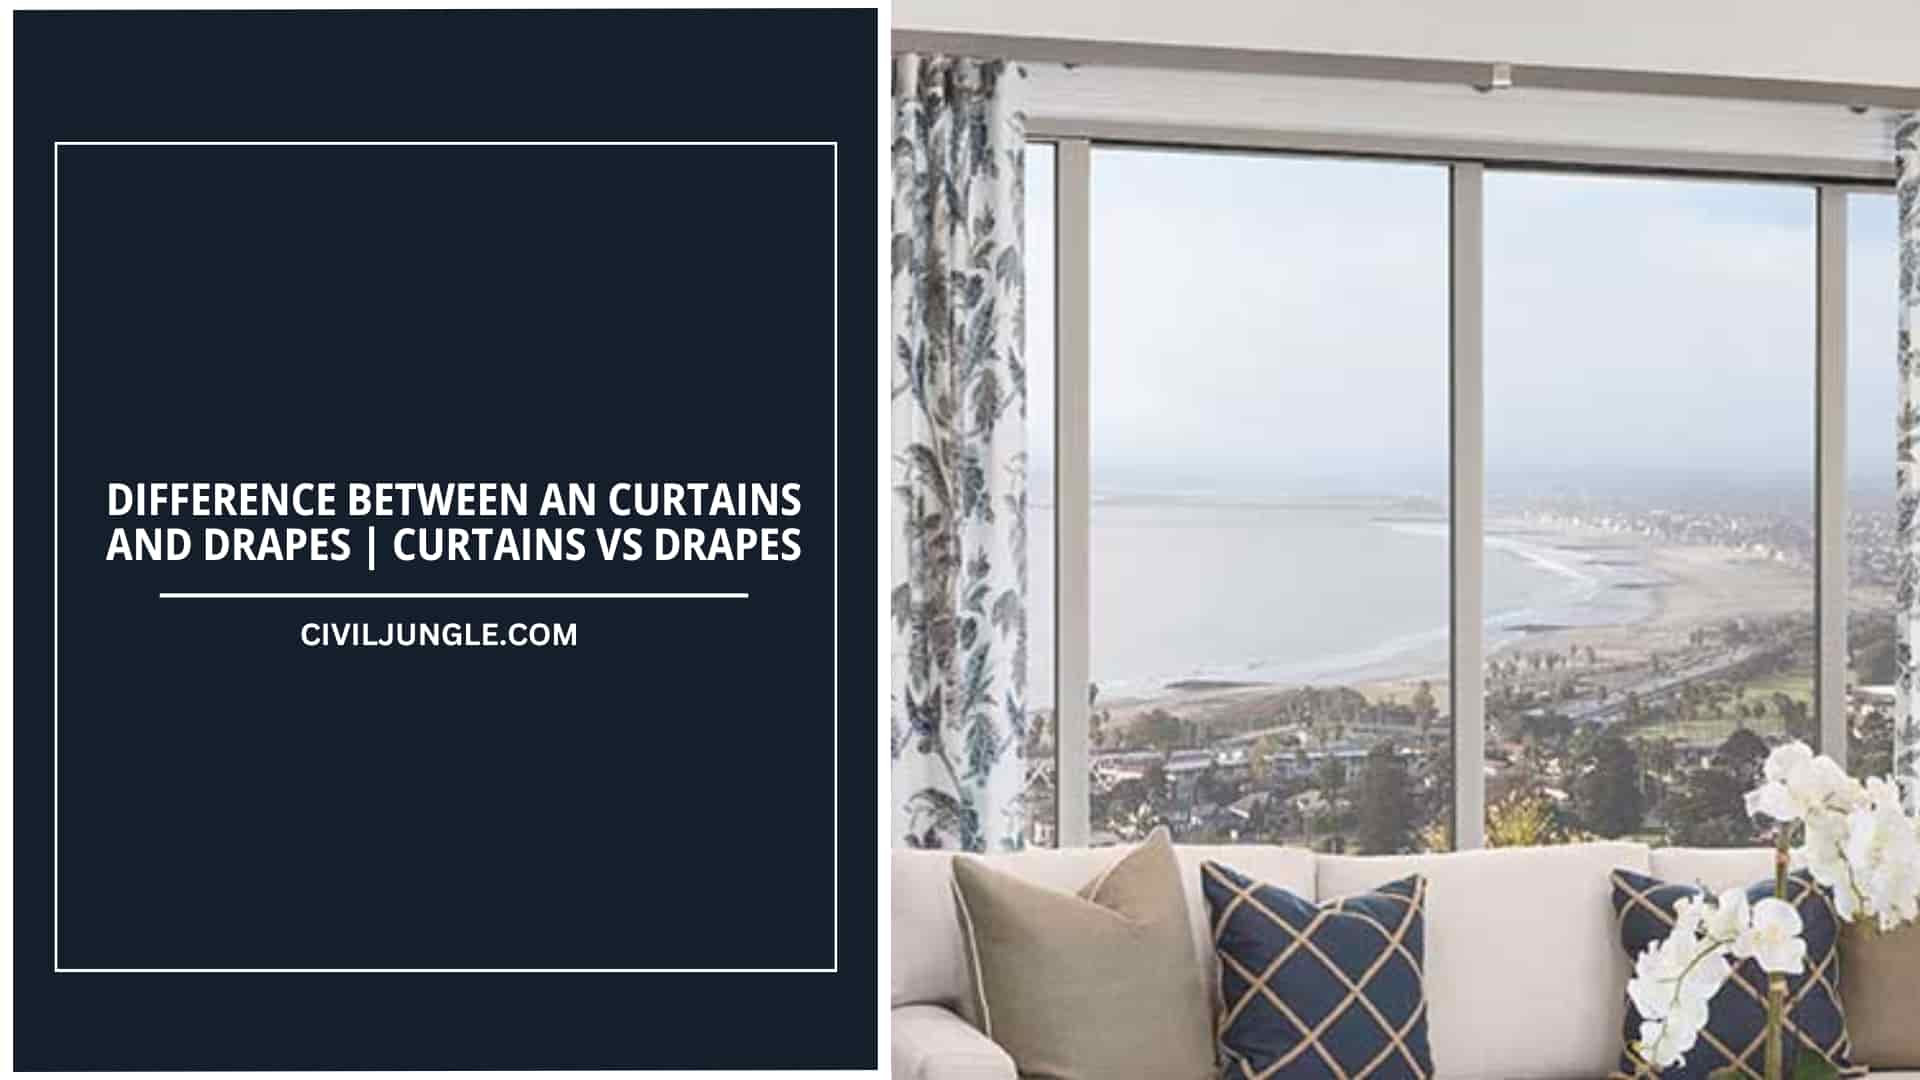 Difference Between an Curtains and Drapes | Curtains Vs Drapes